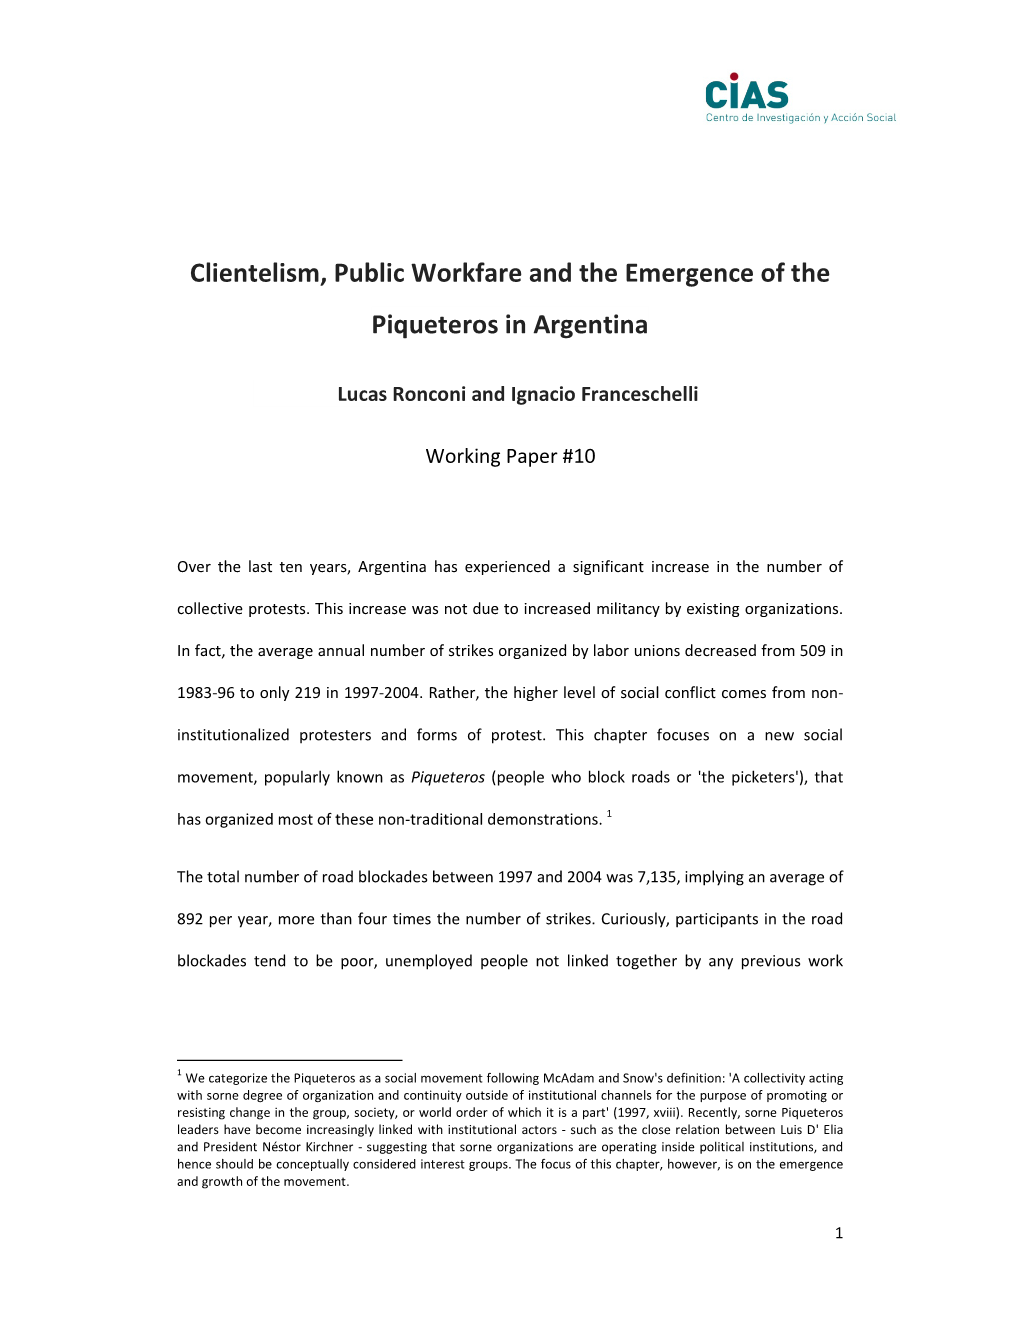 Clientelism, Public Workfare and the Emergence of the Piqueteros in Argentina